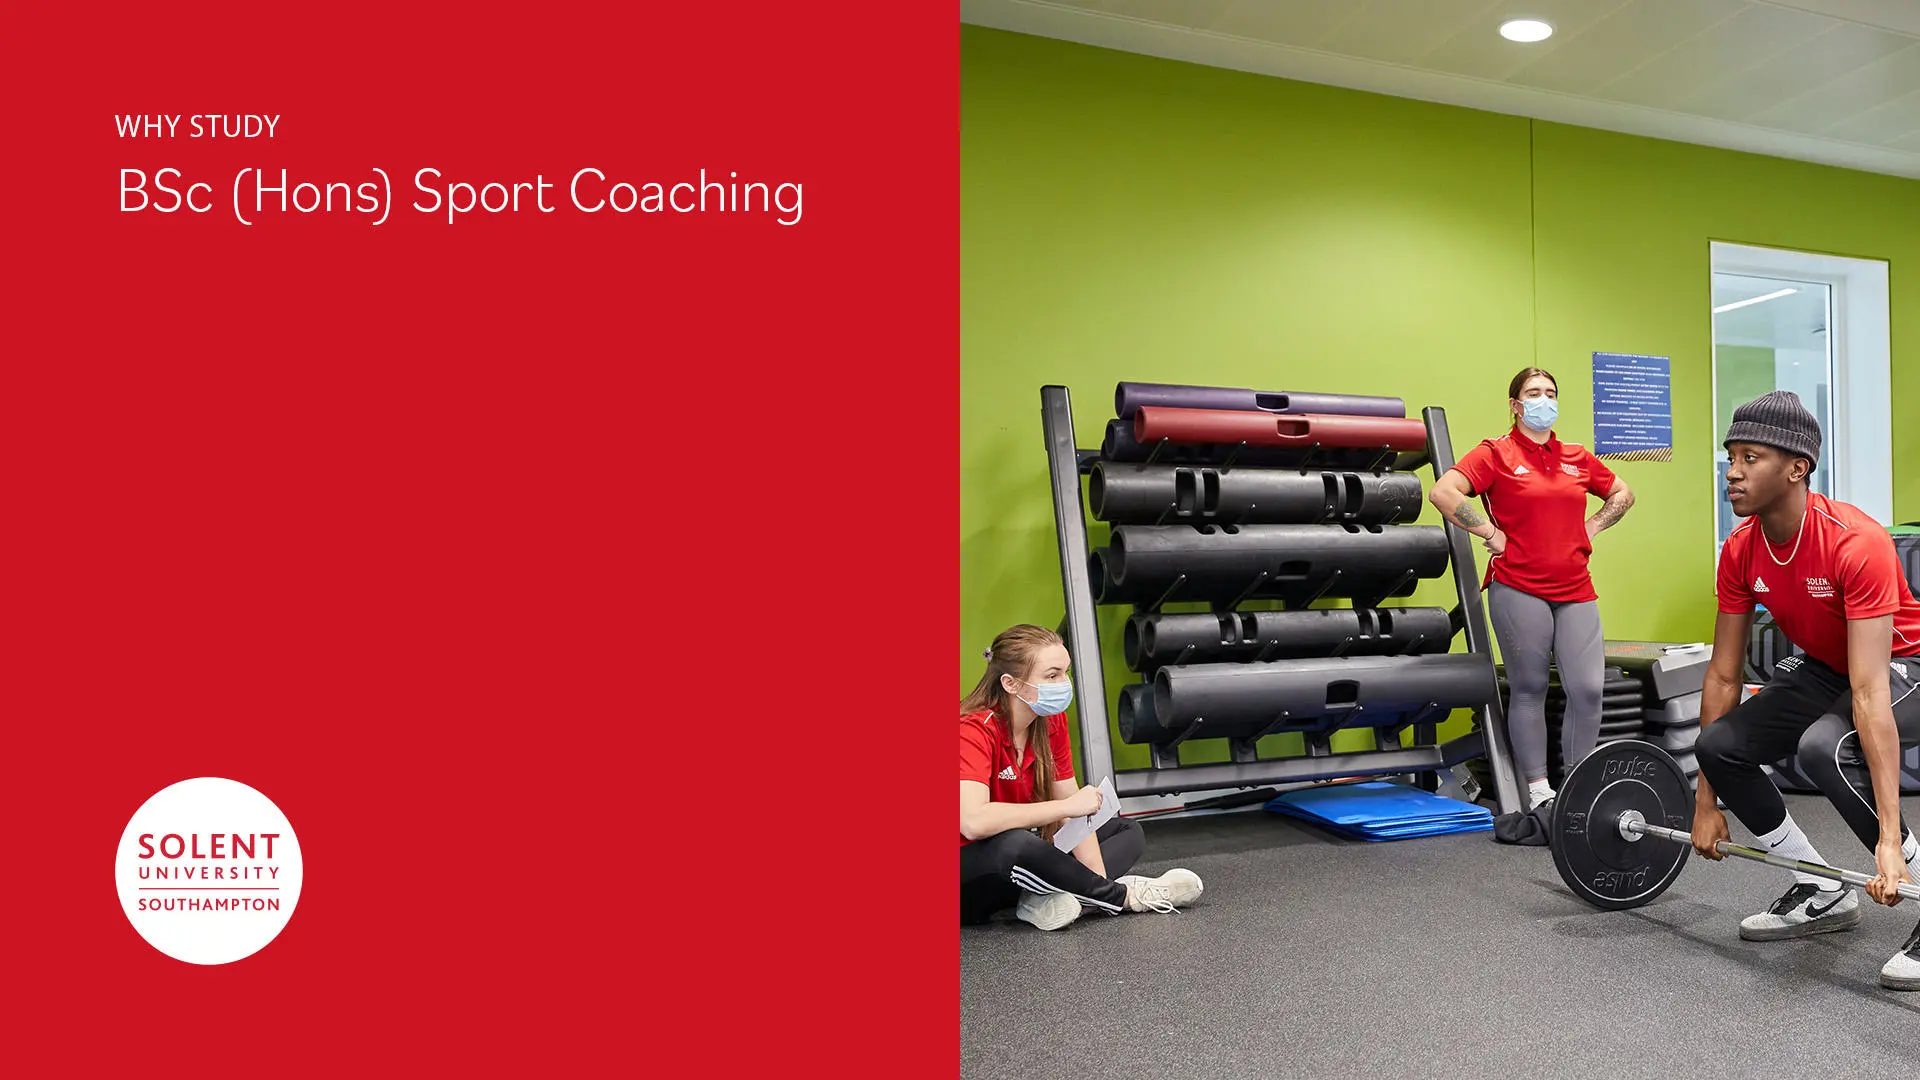 Image reads Why study BSc (Hons) Sport Coaching